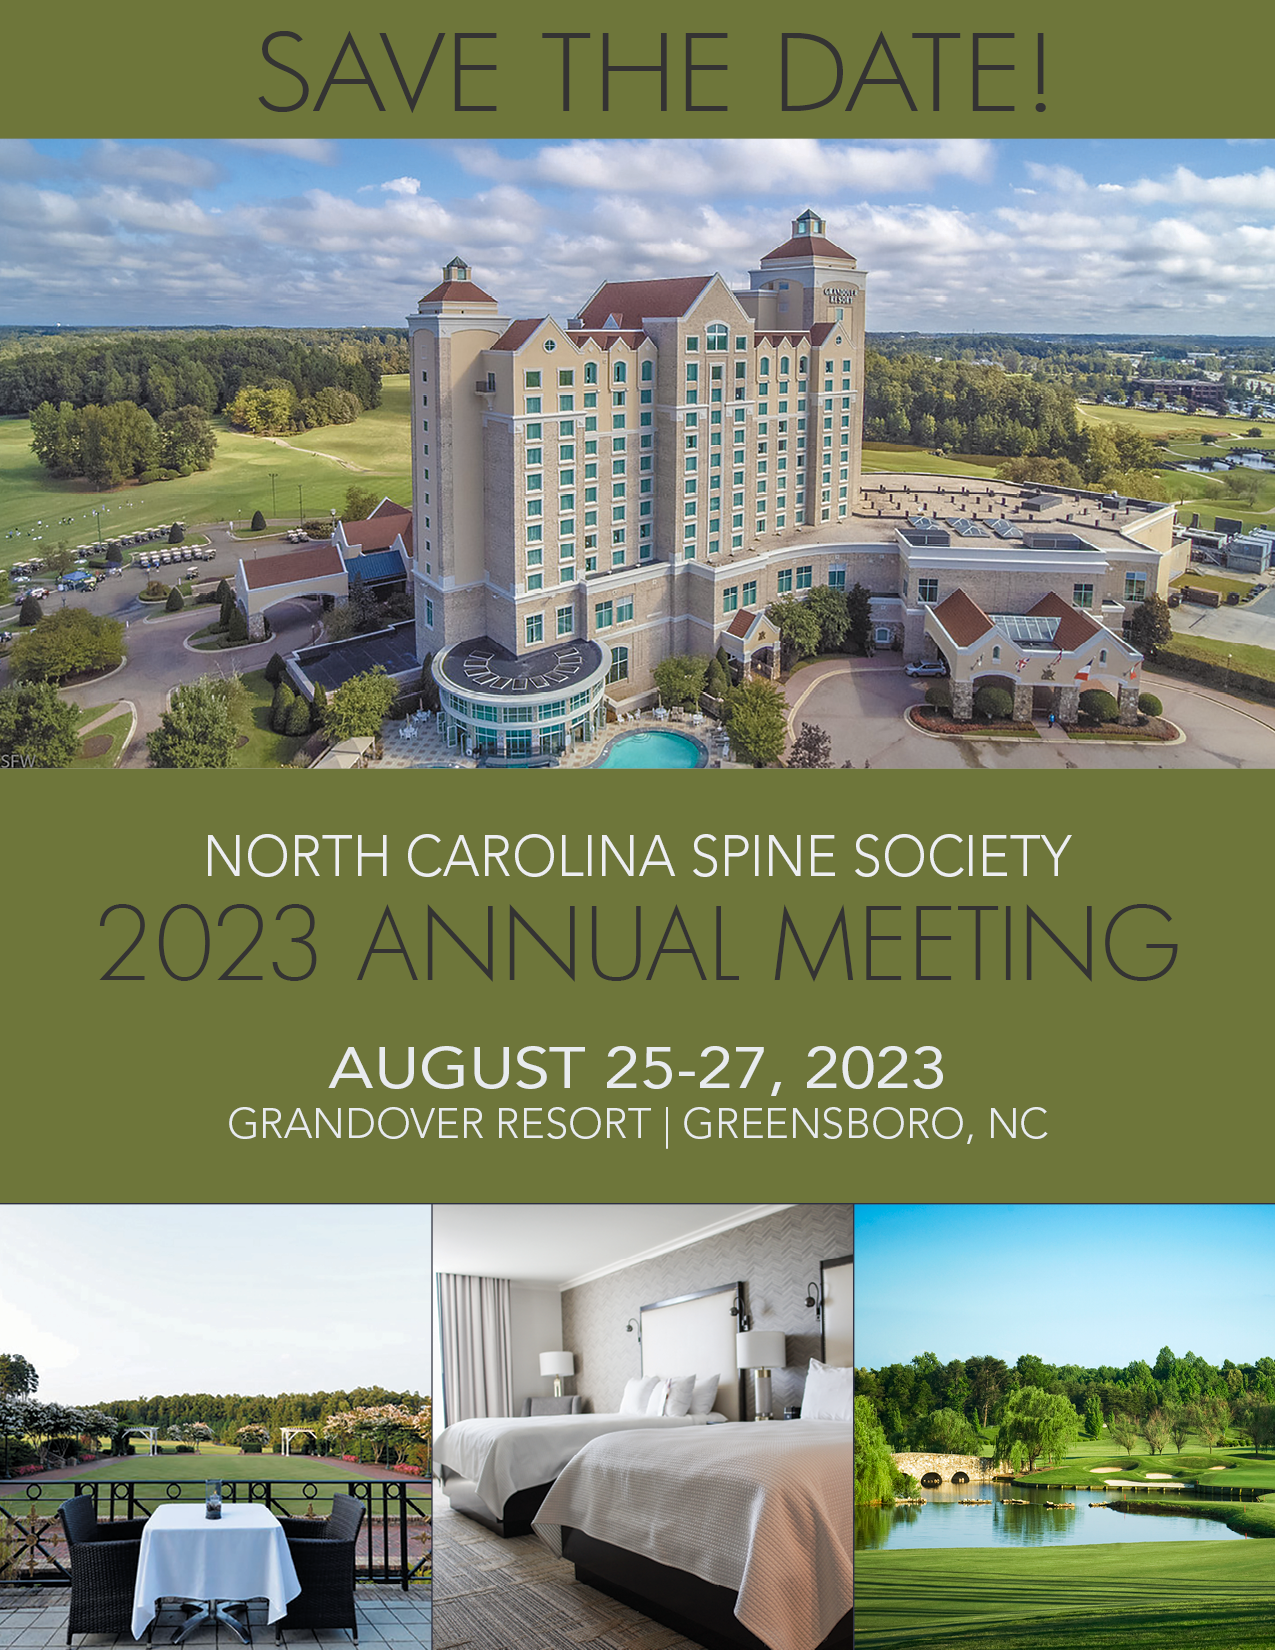 Save the Date for the 2023 NCSS Annual Meeting at the Grandover in Greensboro - Aug. 25-27